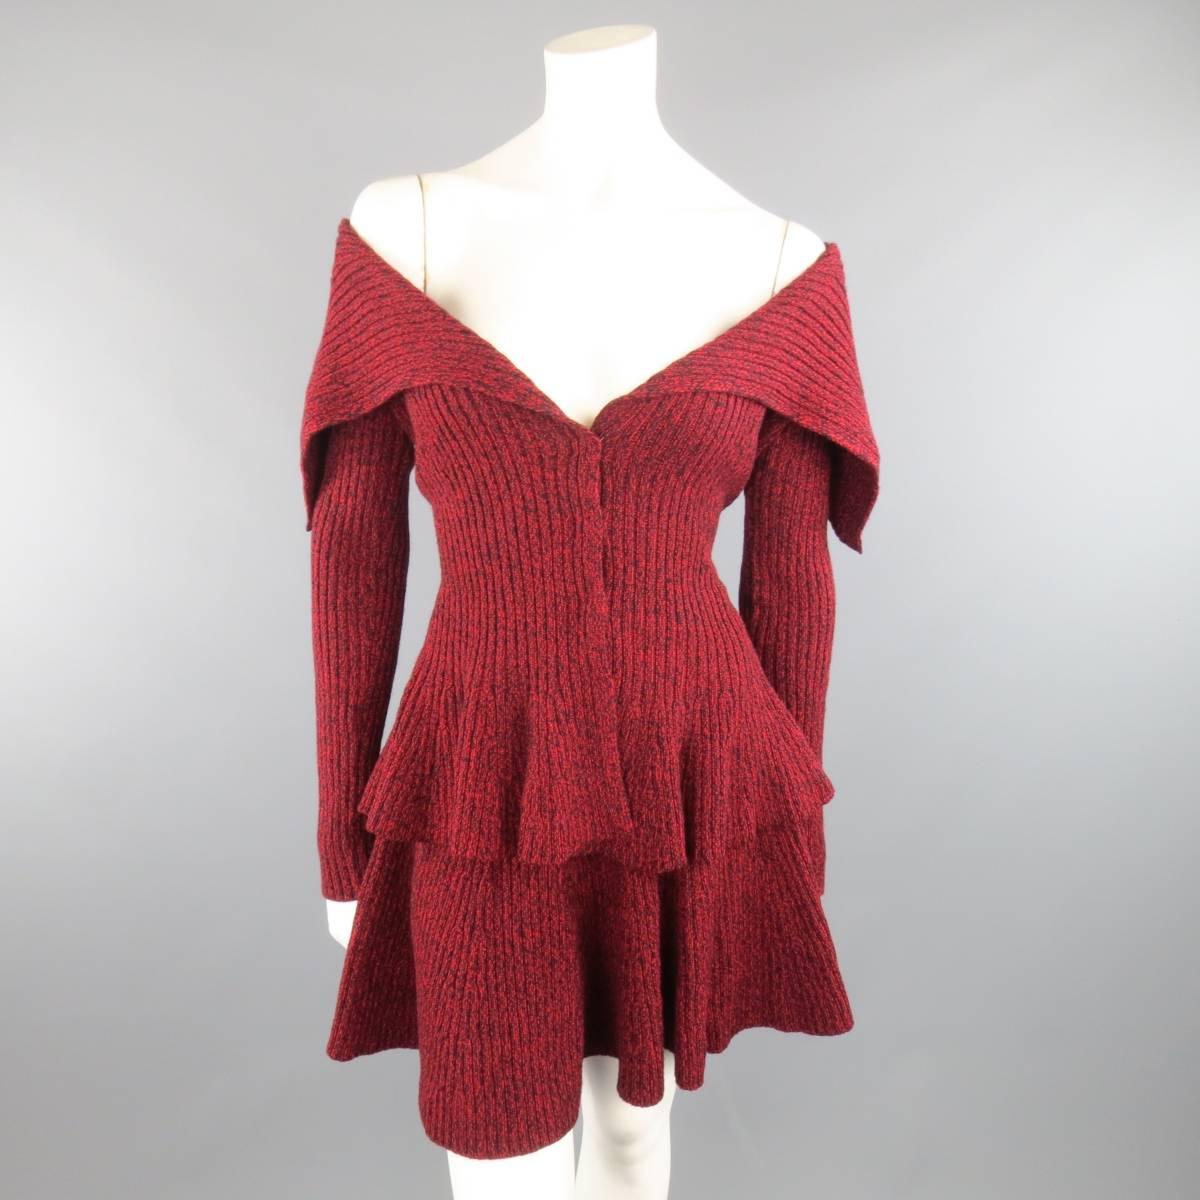 ALEXANDER MCQUEEN knitwear set includes comes in a burgundy, red, and black Heathered wool knit and includes a large, fold over shawl collar, hidden snap closure, and peplum waist cardigan jacket and matching ruffled mini skirt. Made in Italy.
